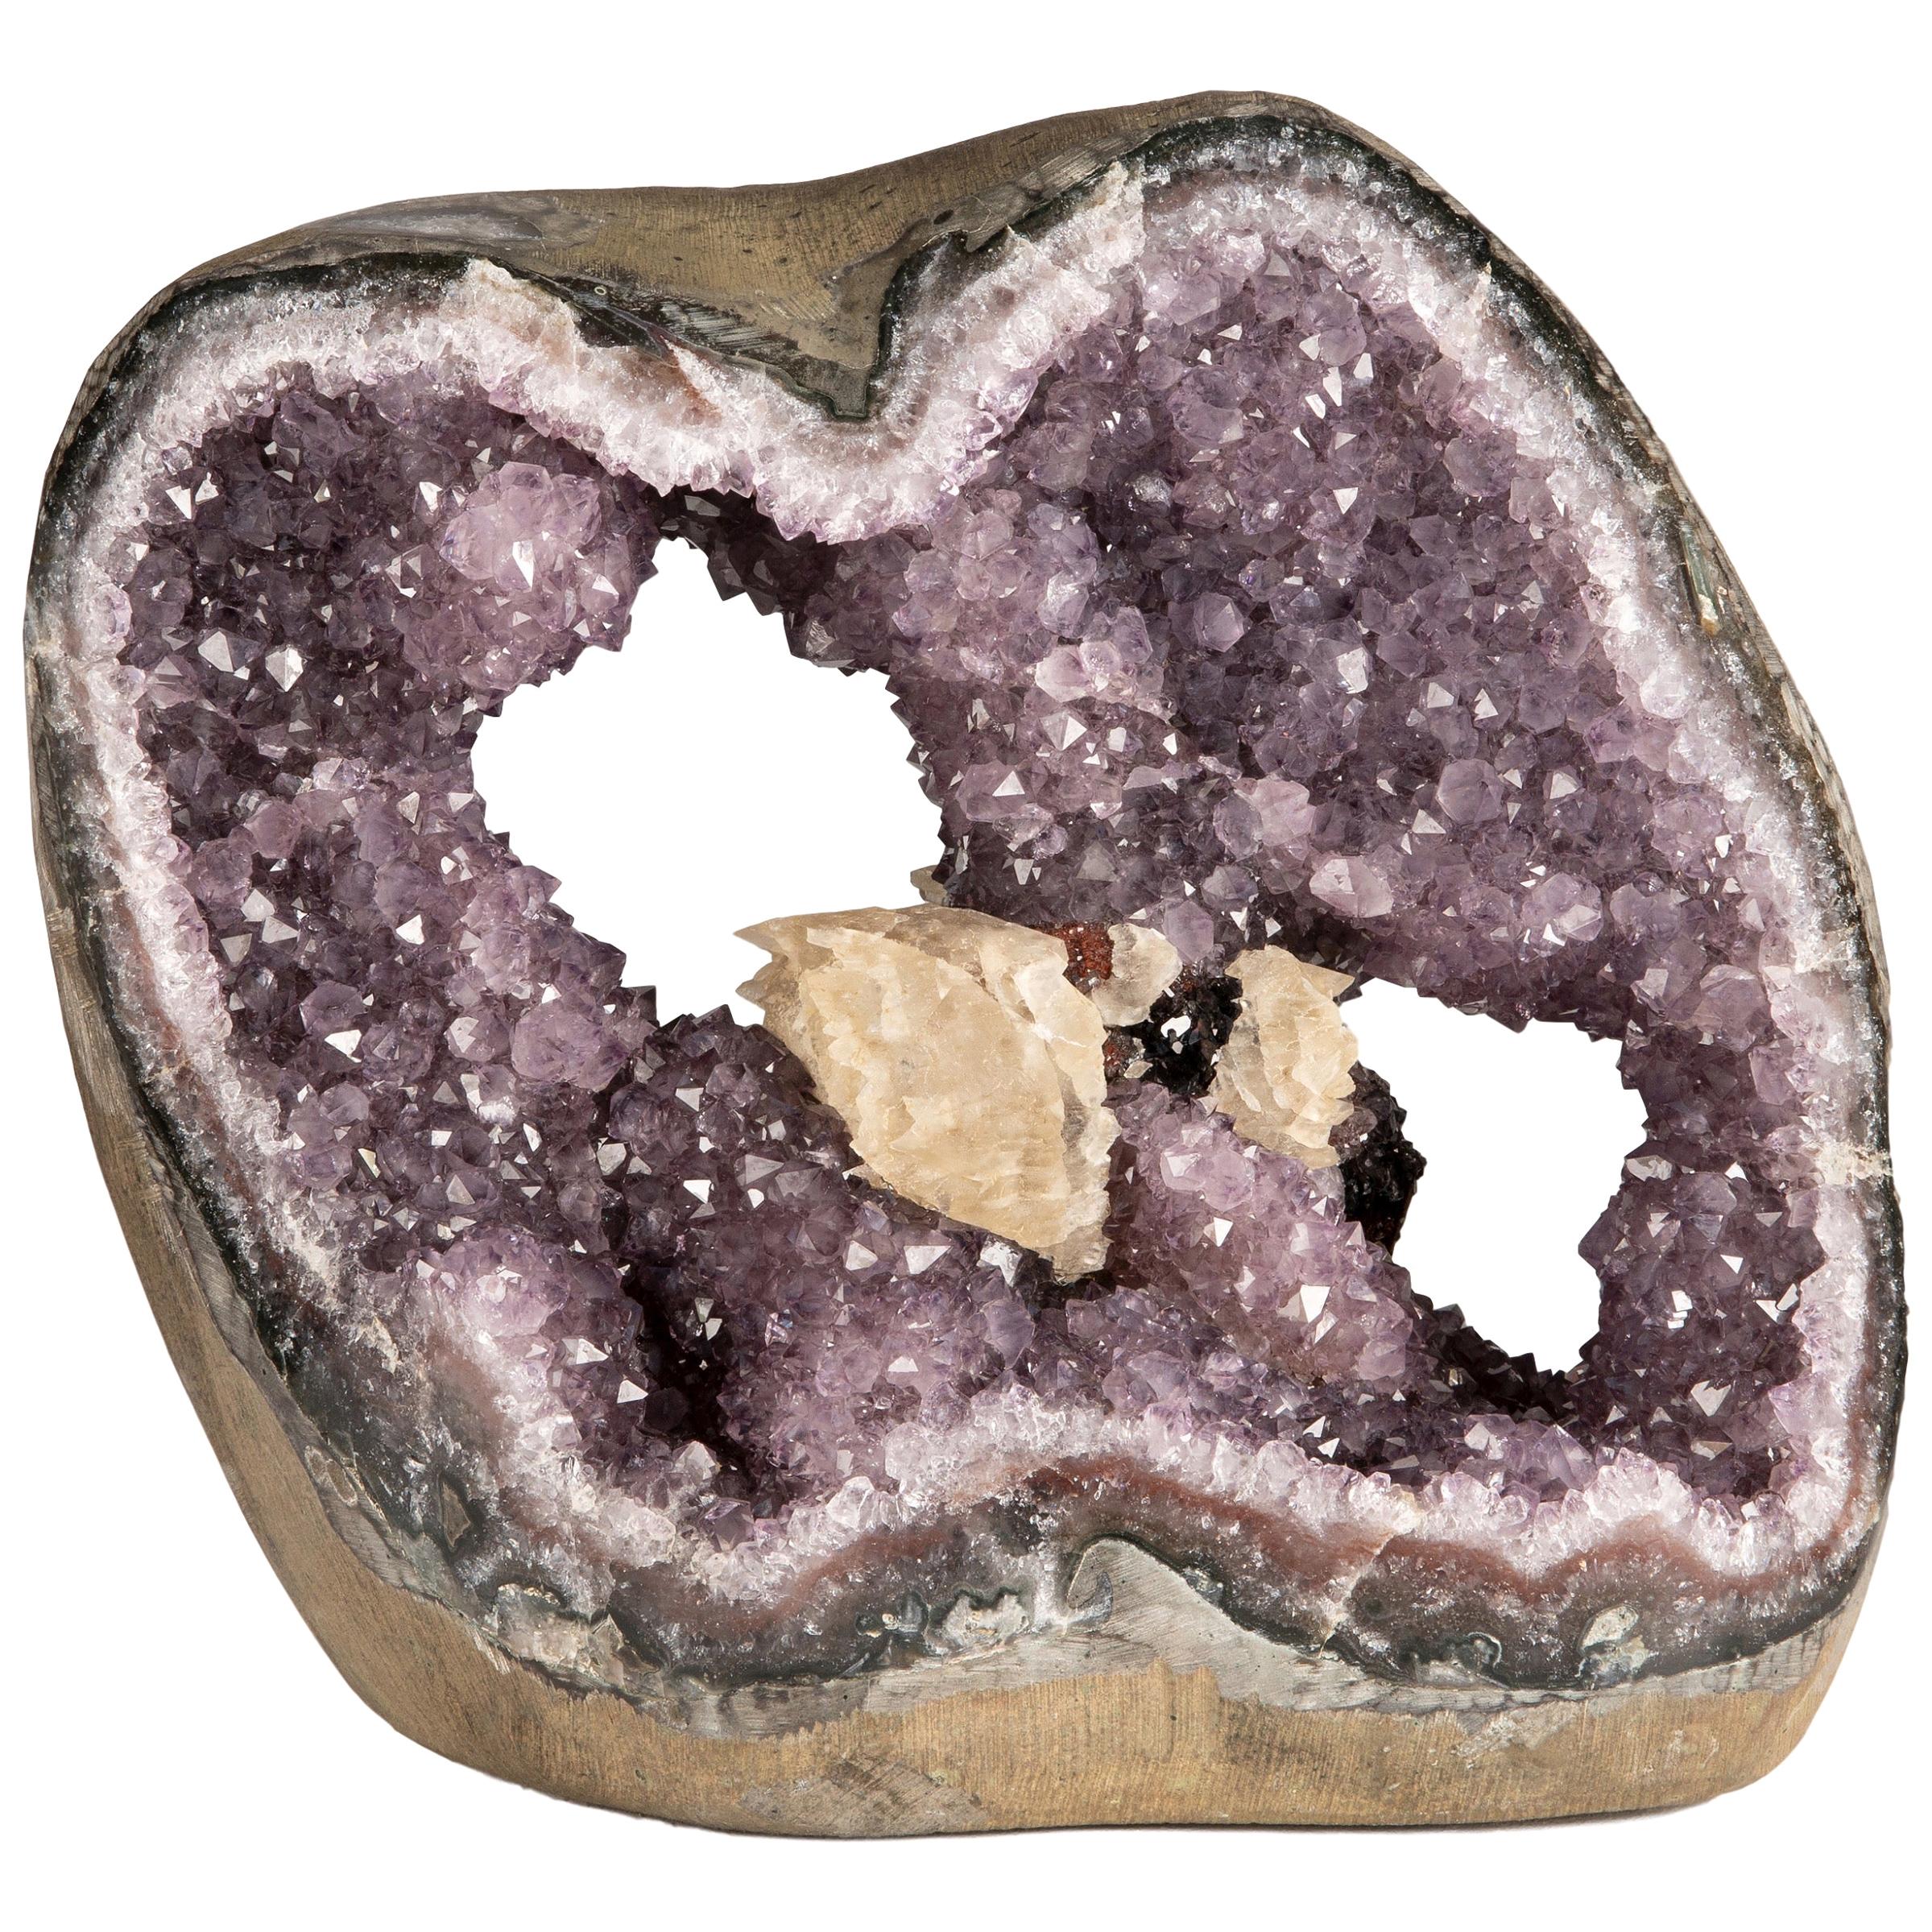 Amethyst Geode with Several Mineral Crystal Formations Inside